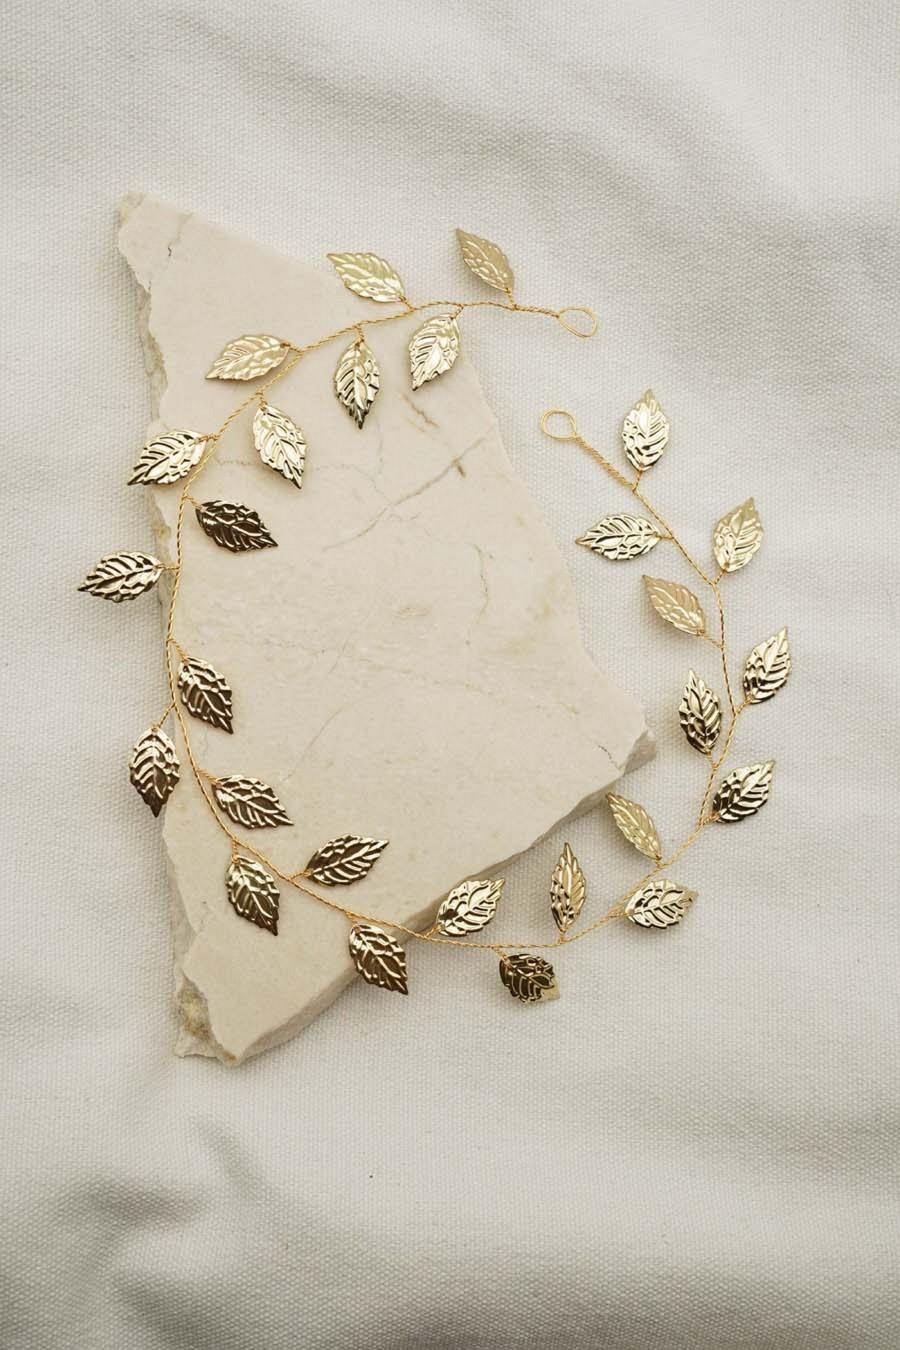 Wedding - Copper Leaf Branch Style Hair Vine Wedding Headpiece * Gold, Silver Available *